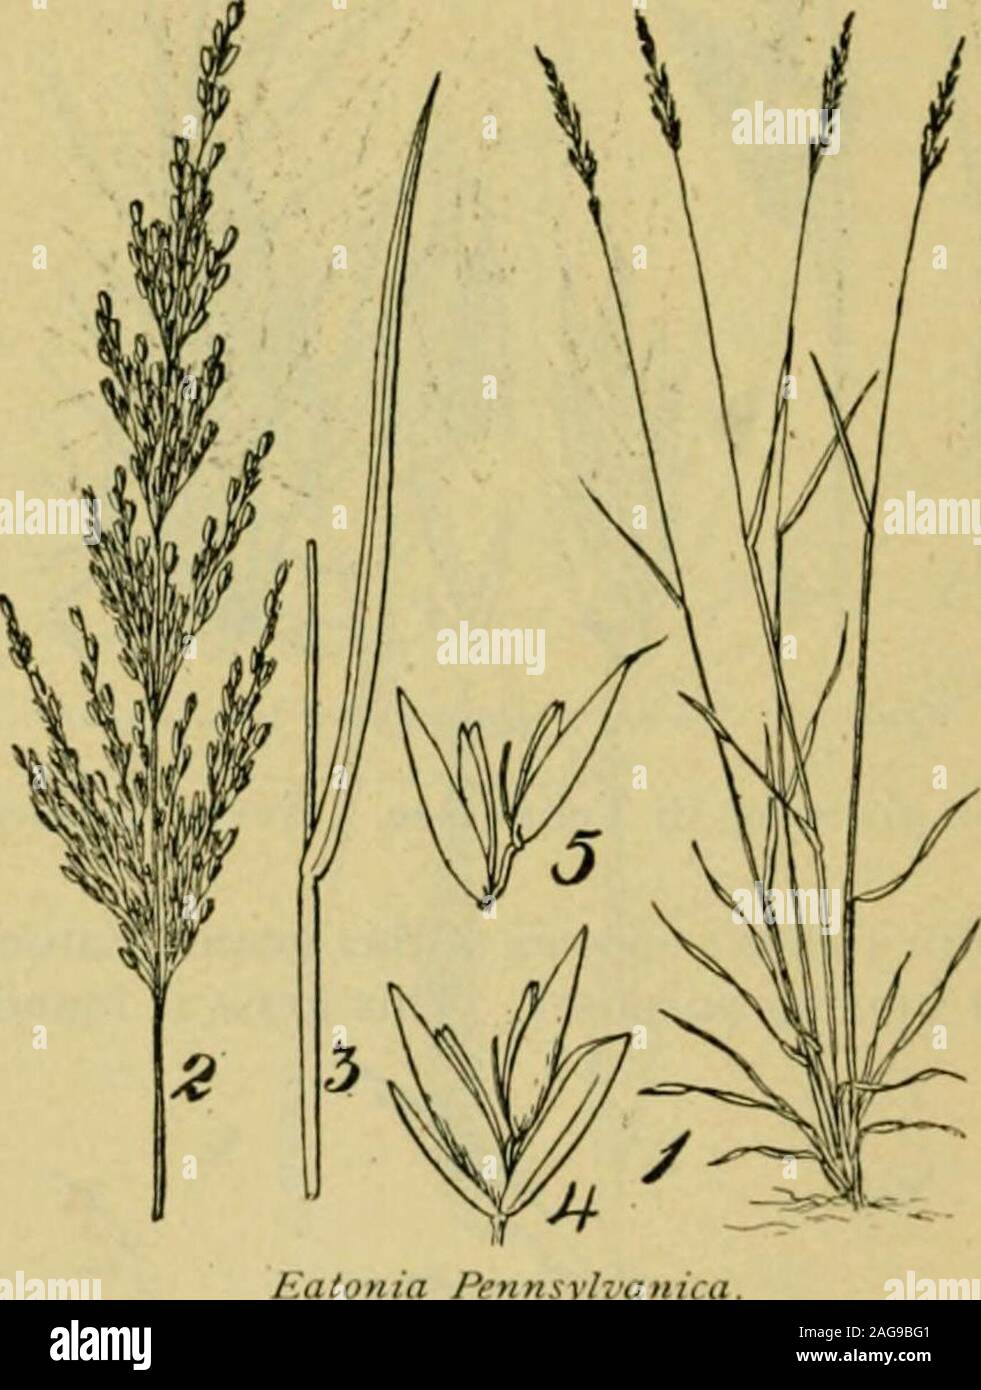 . Grasses and forage plants, by J.B. Killebrew. olilint; Fi-siiir—Fis/nui iiiiliiiis 18(i Middle Tennessee and in moist, open places on the borders of woods inall parts of the state. It is a valuable addition to the native grasses andcattle seem to relish it more than any other wild grass. A species knownas Eatonia filiformis grows on the dry hills of the cretaceous formation inWest Tennessee, but while cattle will eat it in the absence of other grassesit is not of much agricultural value. Diarrhena Americana (American Diarrhena) is found growing onthe rich soils among limestone rocks. Its fe Stock Photo